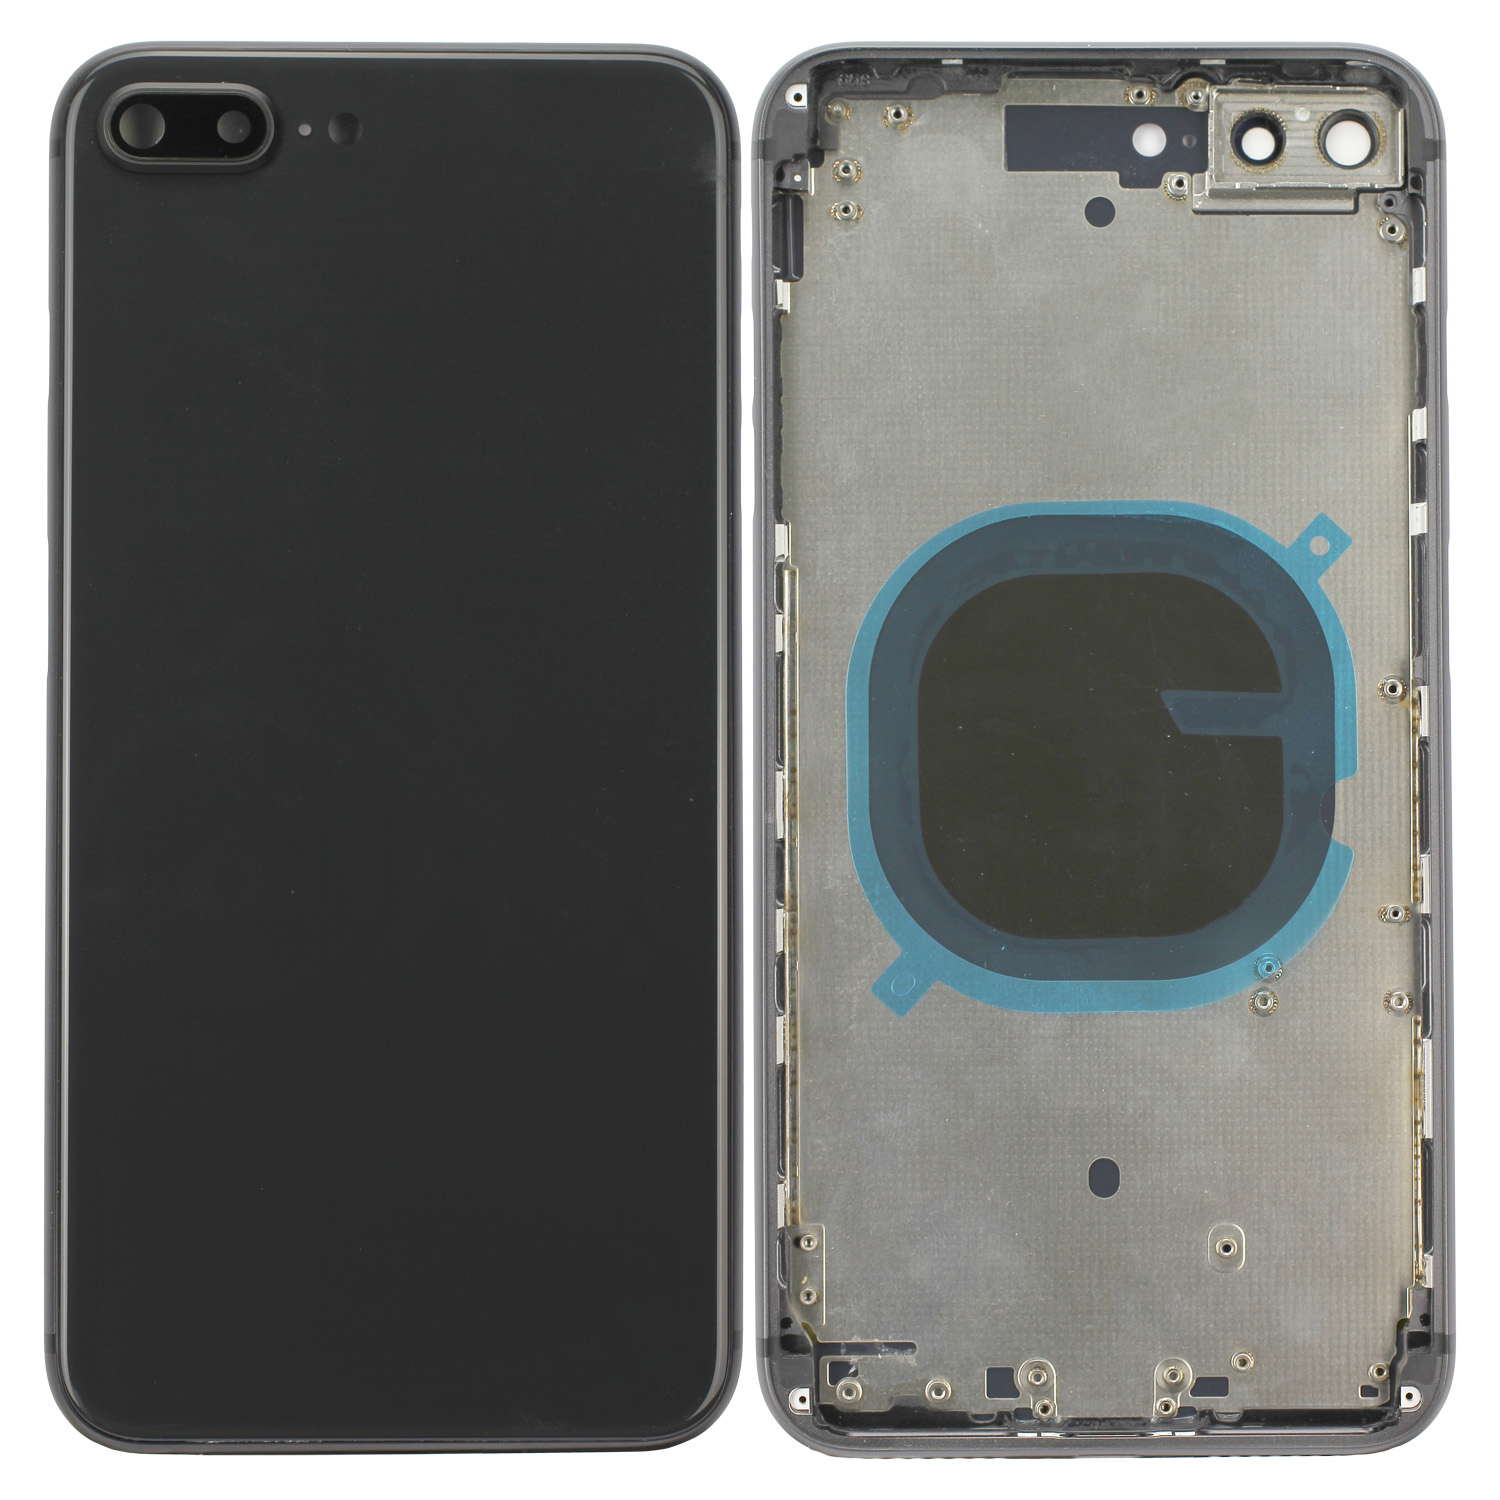 Back Cover Space Grey, Compatible with iPhone 8 Plus without LOGO